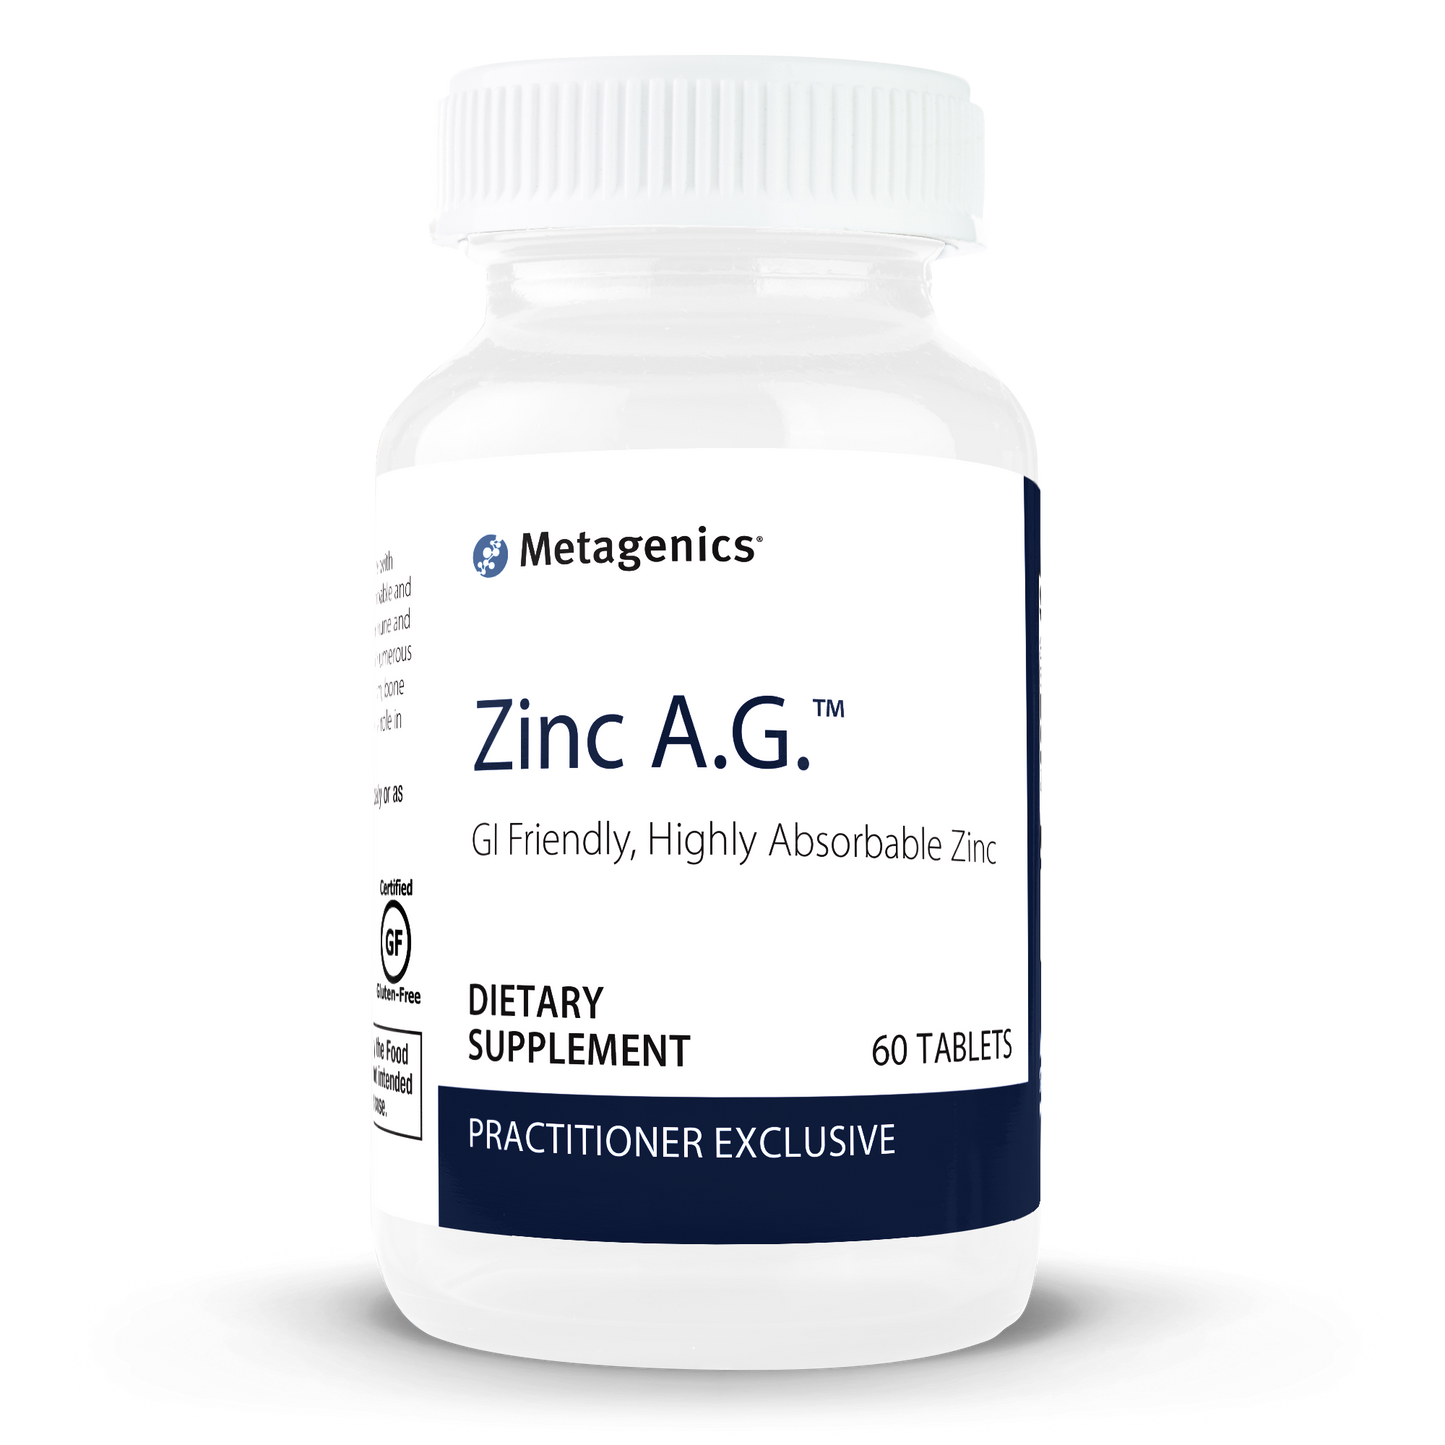 Essential for immunity, tissue health, and enzyme activity. Highly absorbable with arginine and glycine chelates